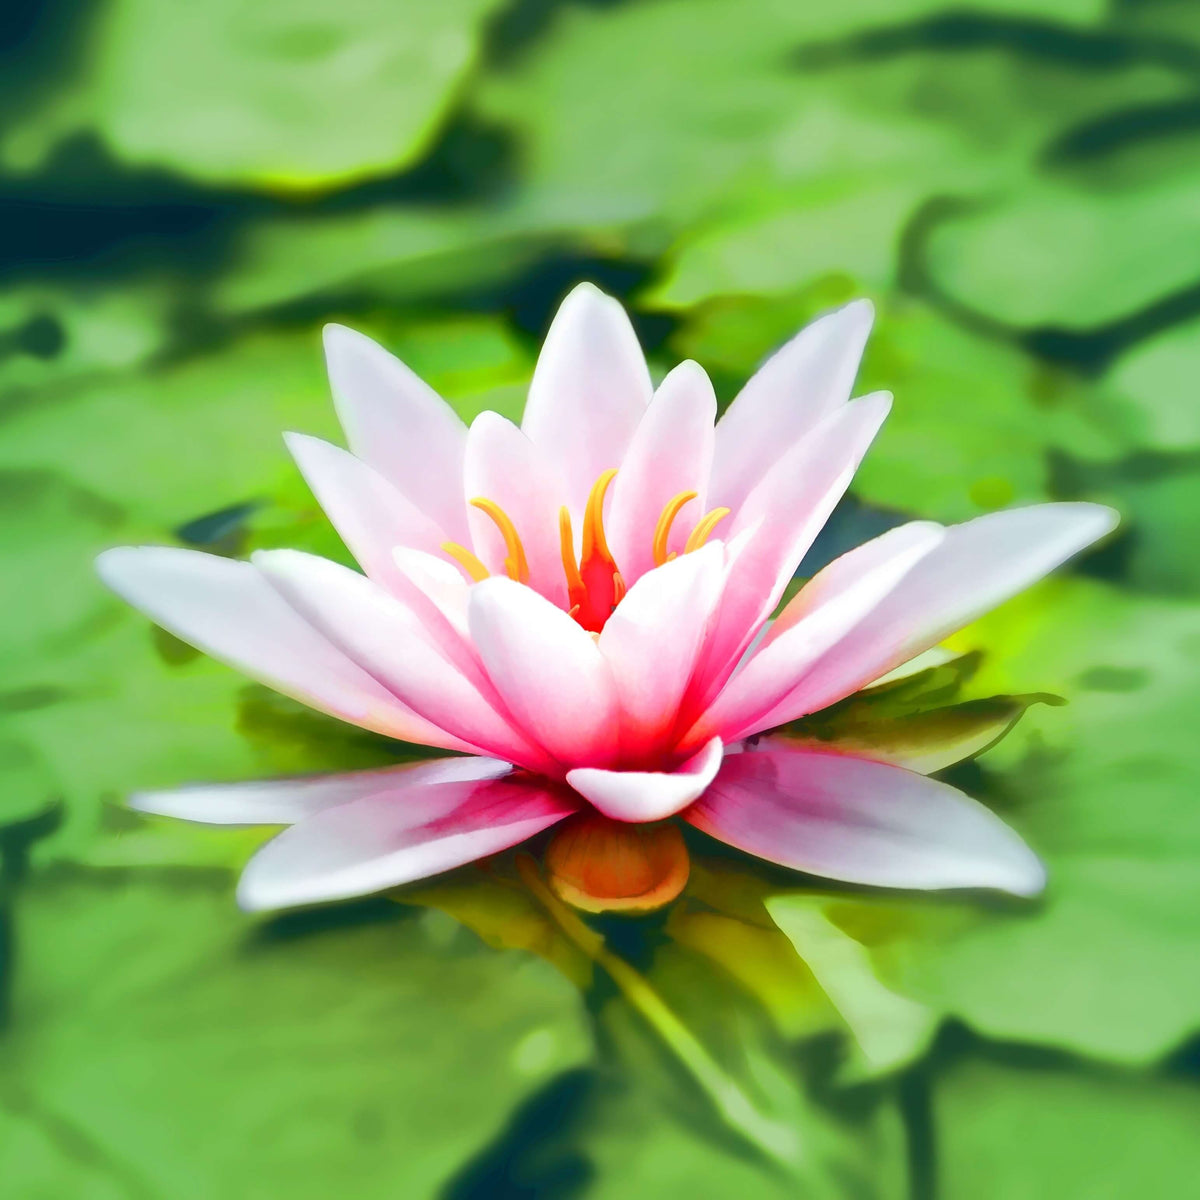 All Secrets Behind Meaning of The Lotus Flower Aromantly